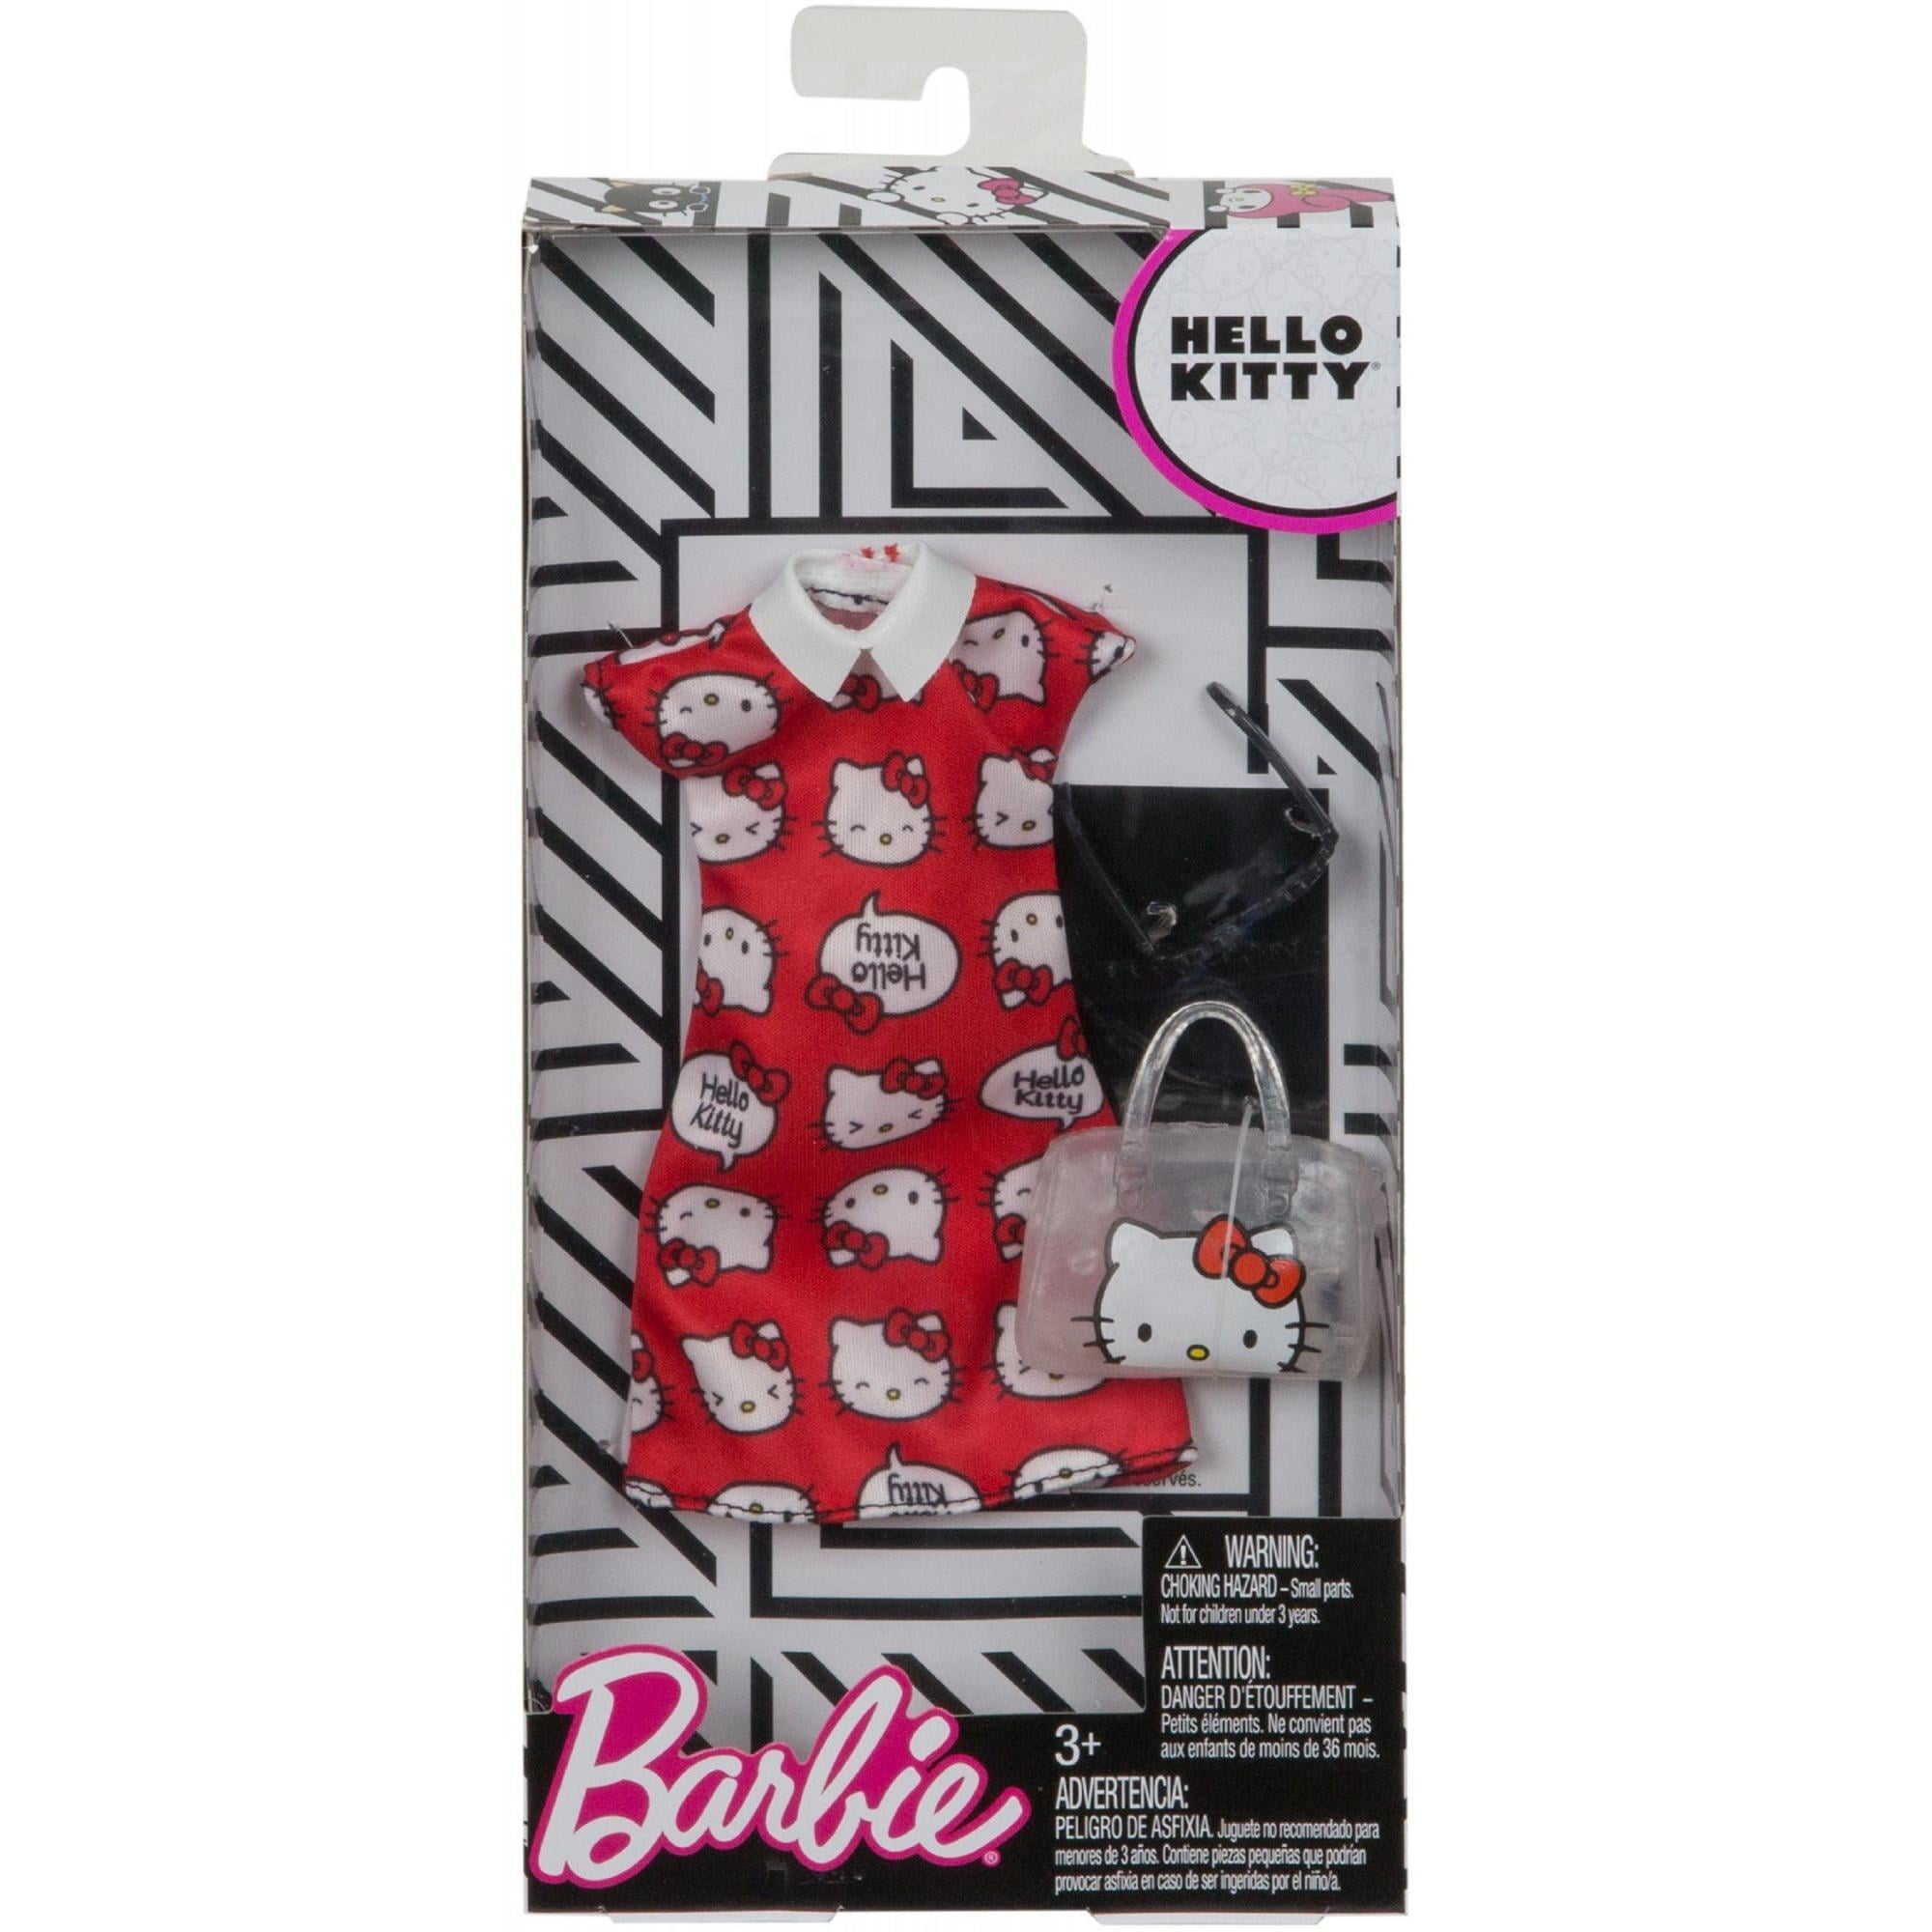 Barbie Kitty Red Dress Pack with Accessories - Walmart.com